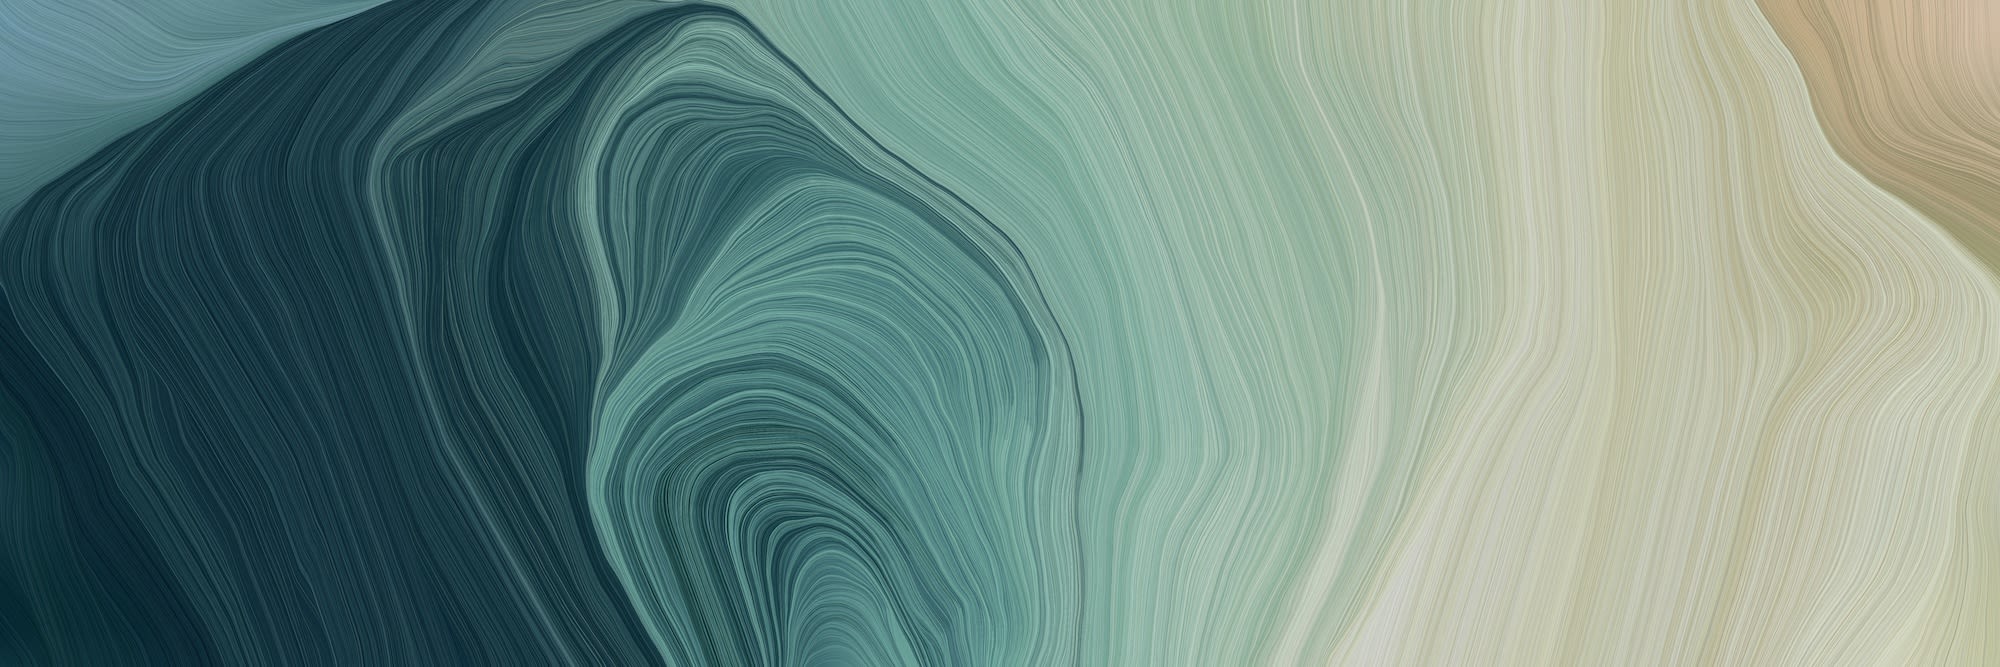 Abstract image of wavy pattern